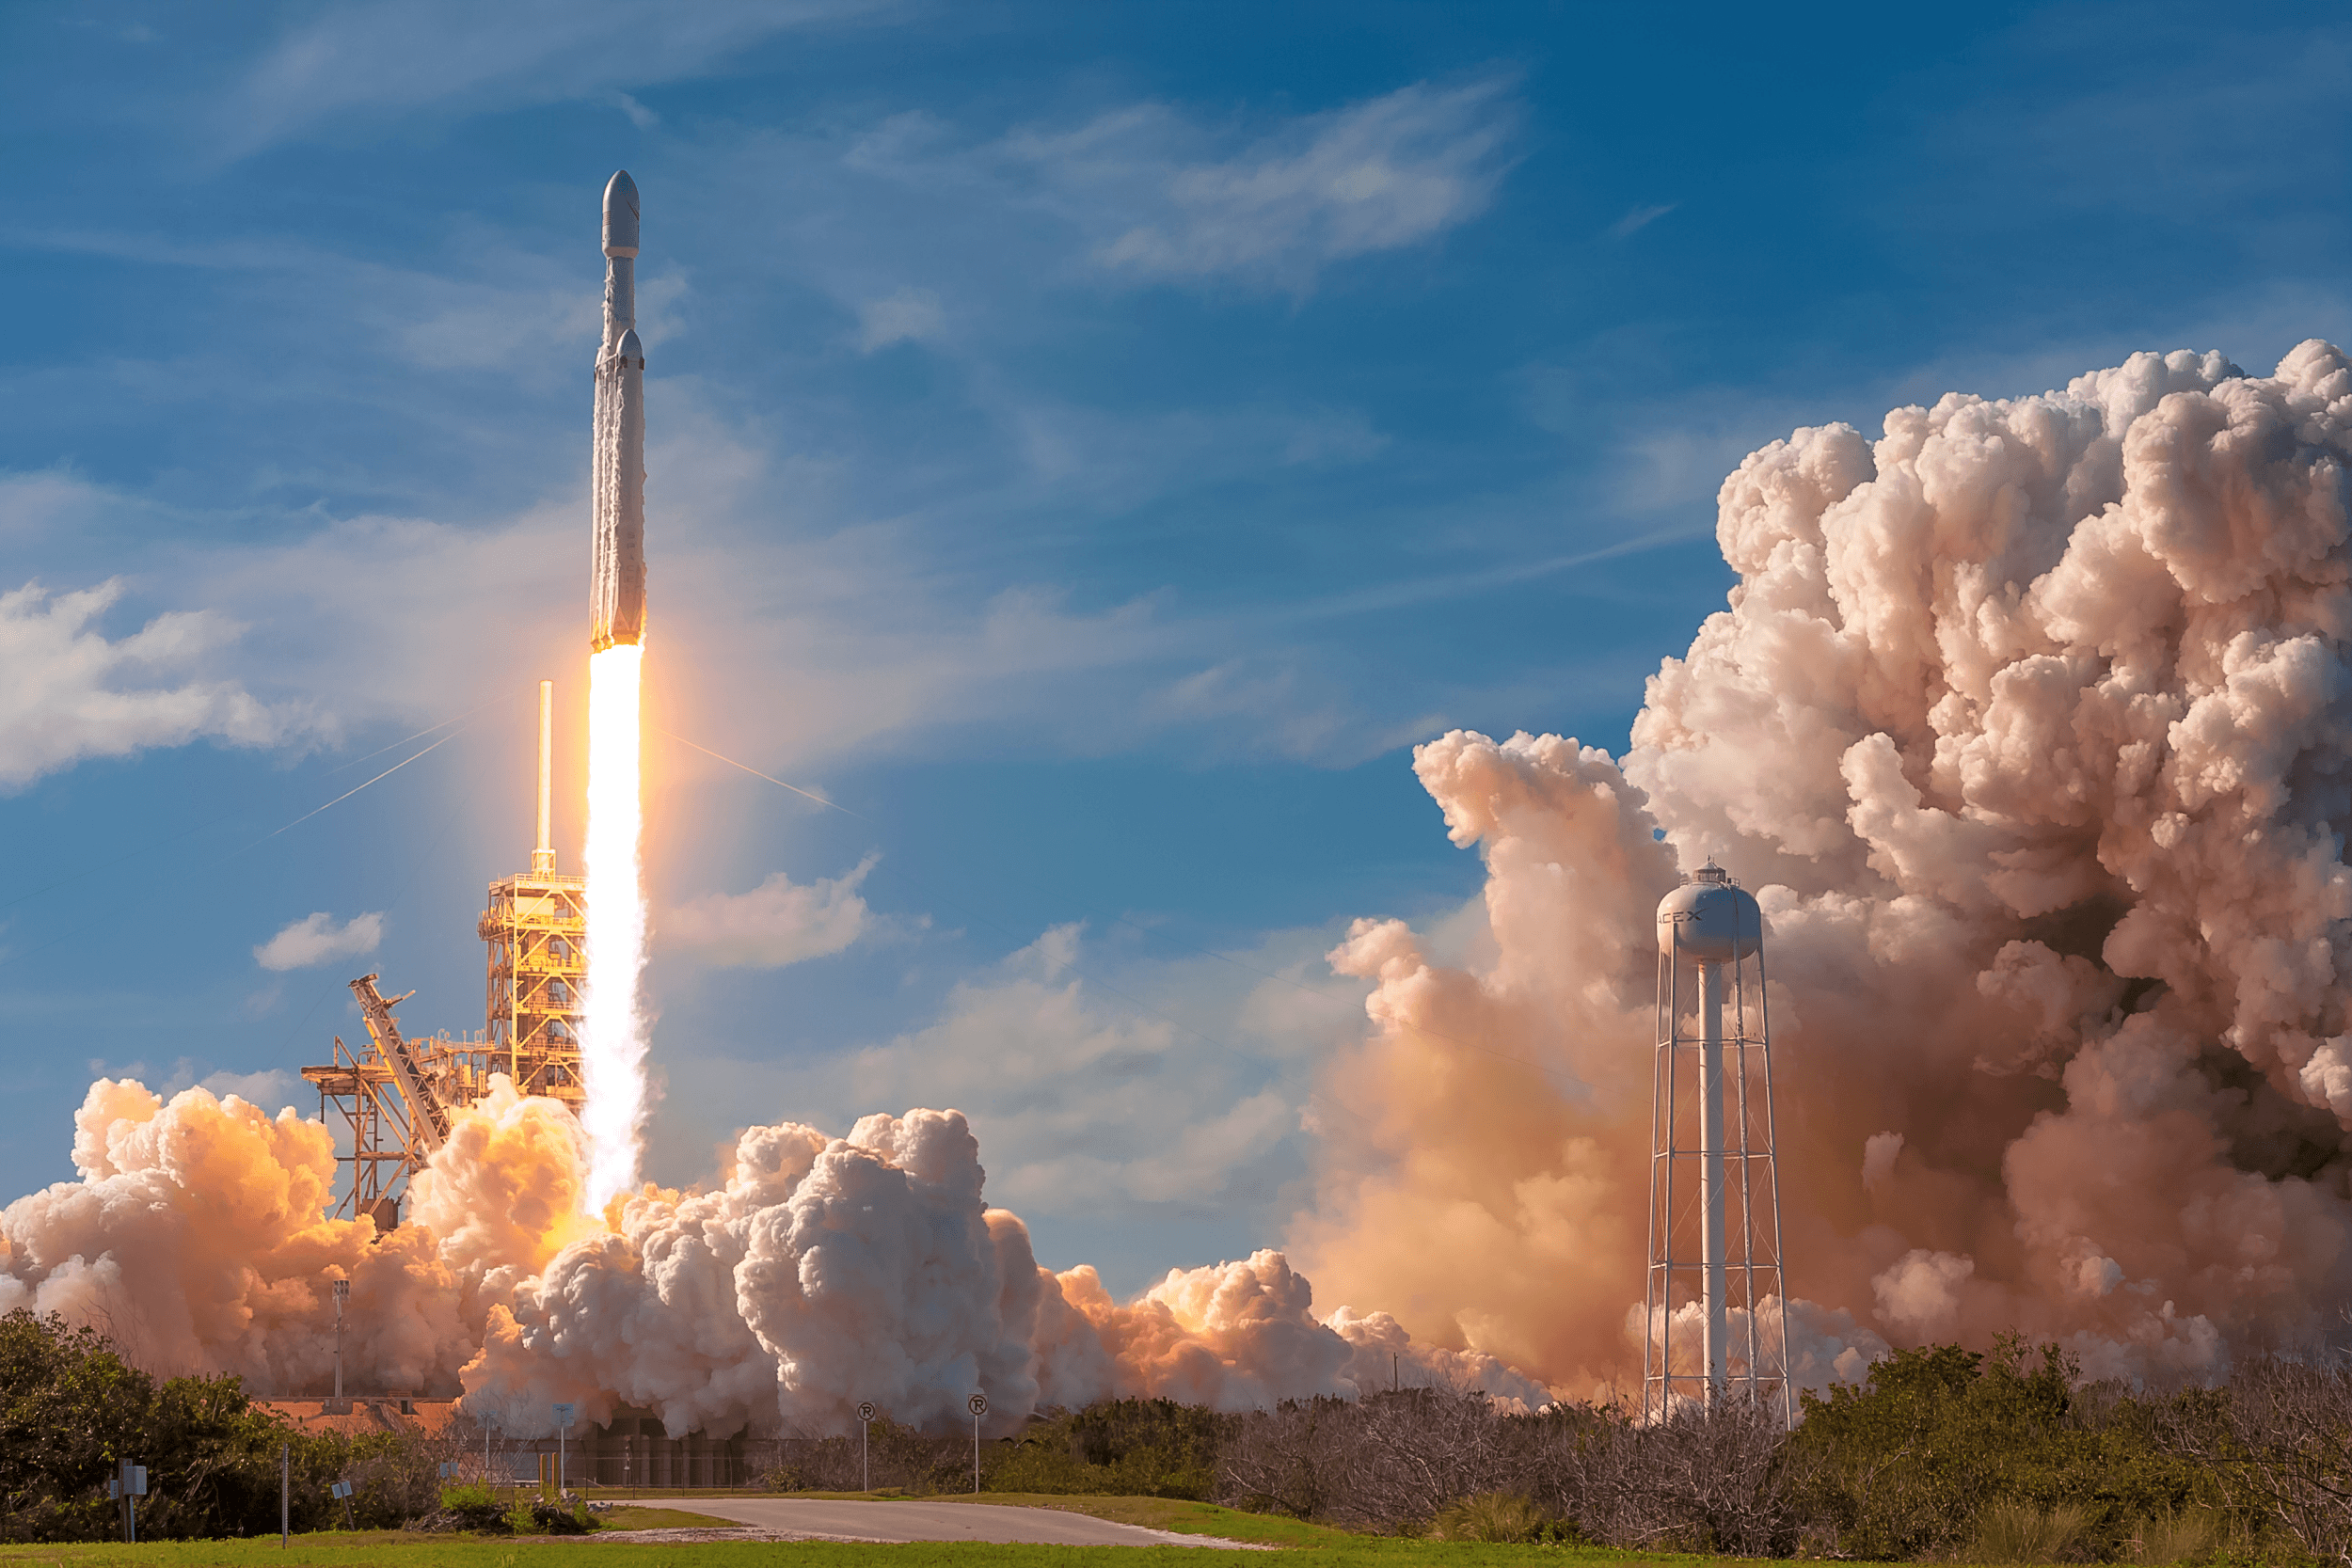 Behind the lens at SpaceX's historic Falcon Heavy launch